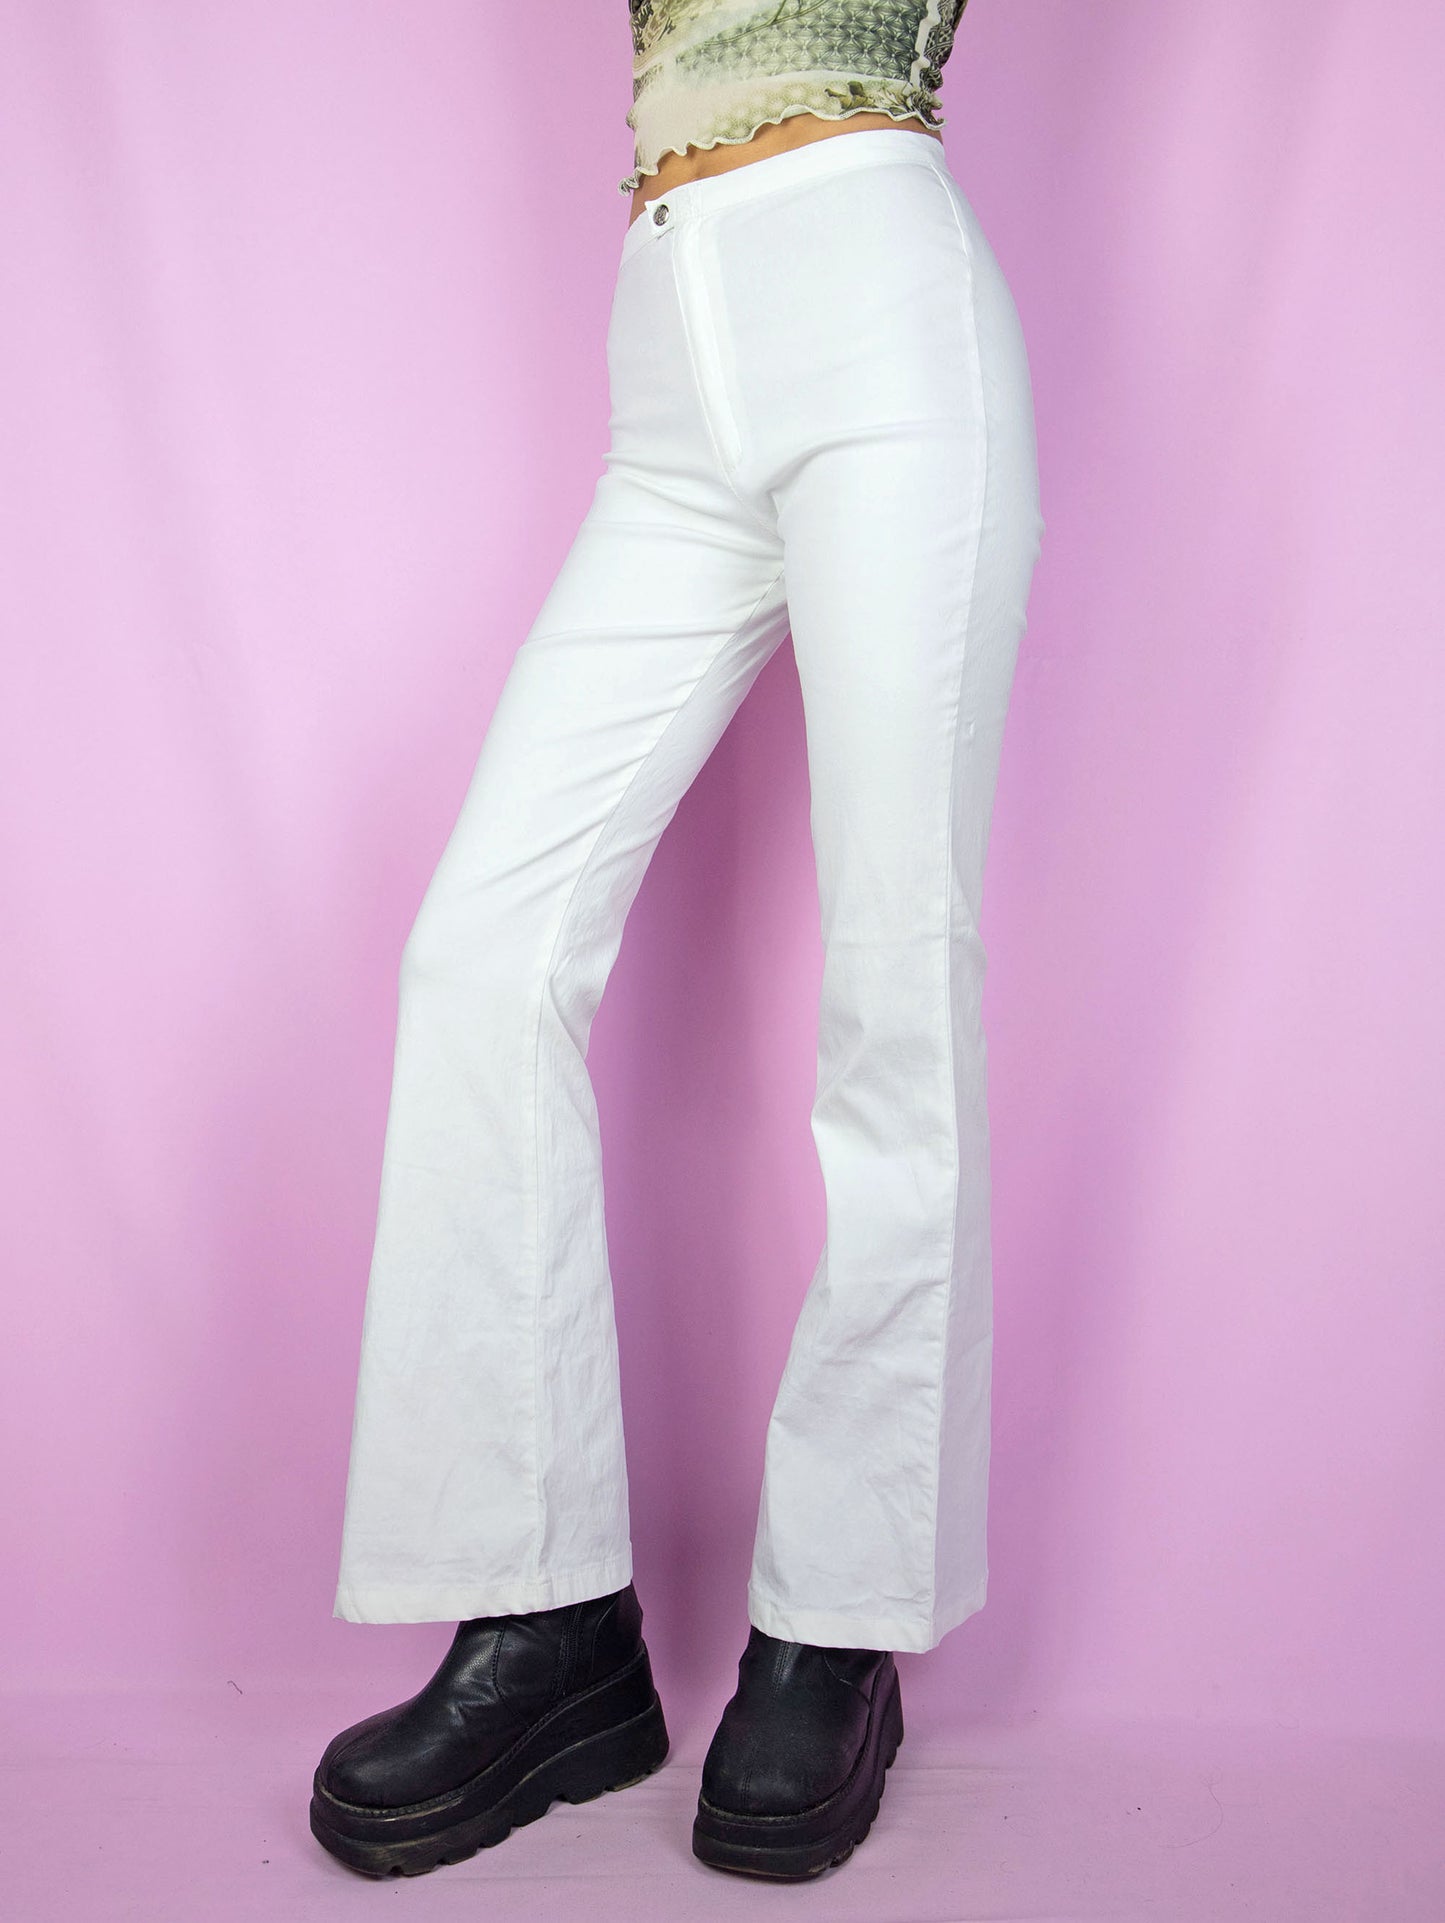 The Y2K White Flare Pants are vintage 2000s stretchy high-waisted pants with a front zipper closure.